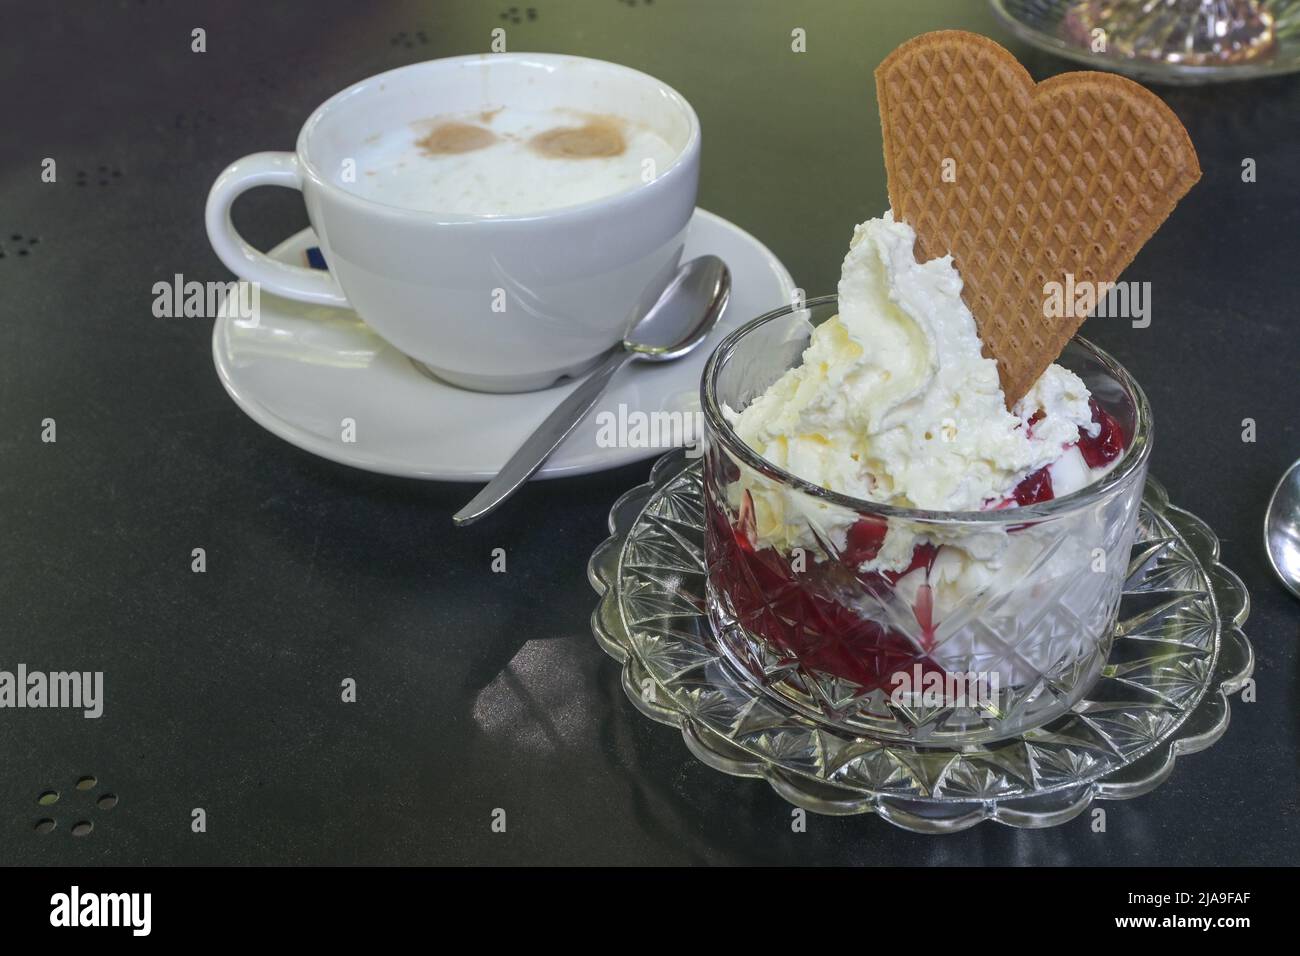 Ice cream with red fruits and whipped cream in a glass bowl and a cup of coffee on a dark table in a street cafe, copy space, selected focus, narrow d Stock Photo